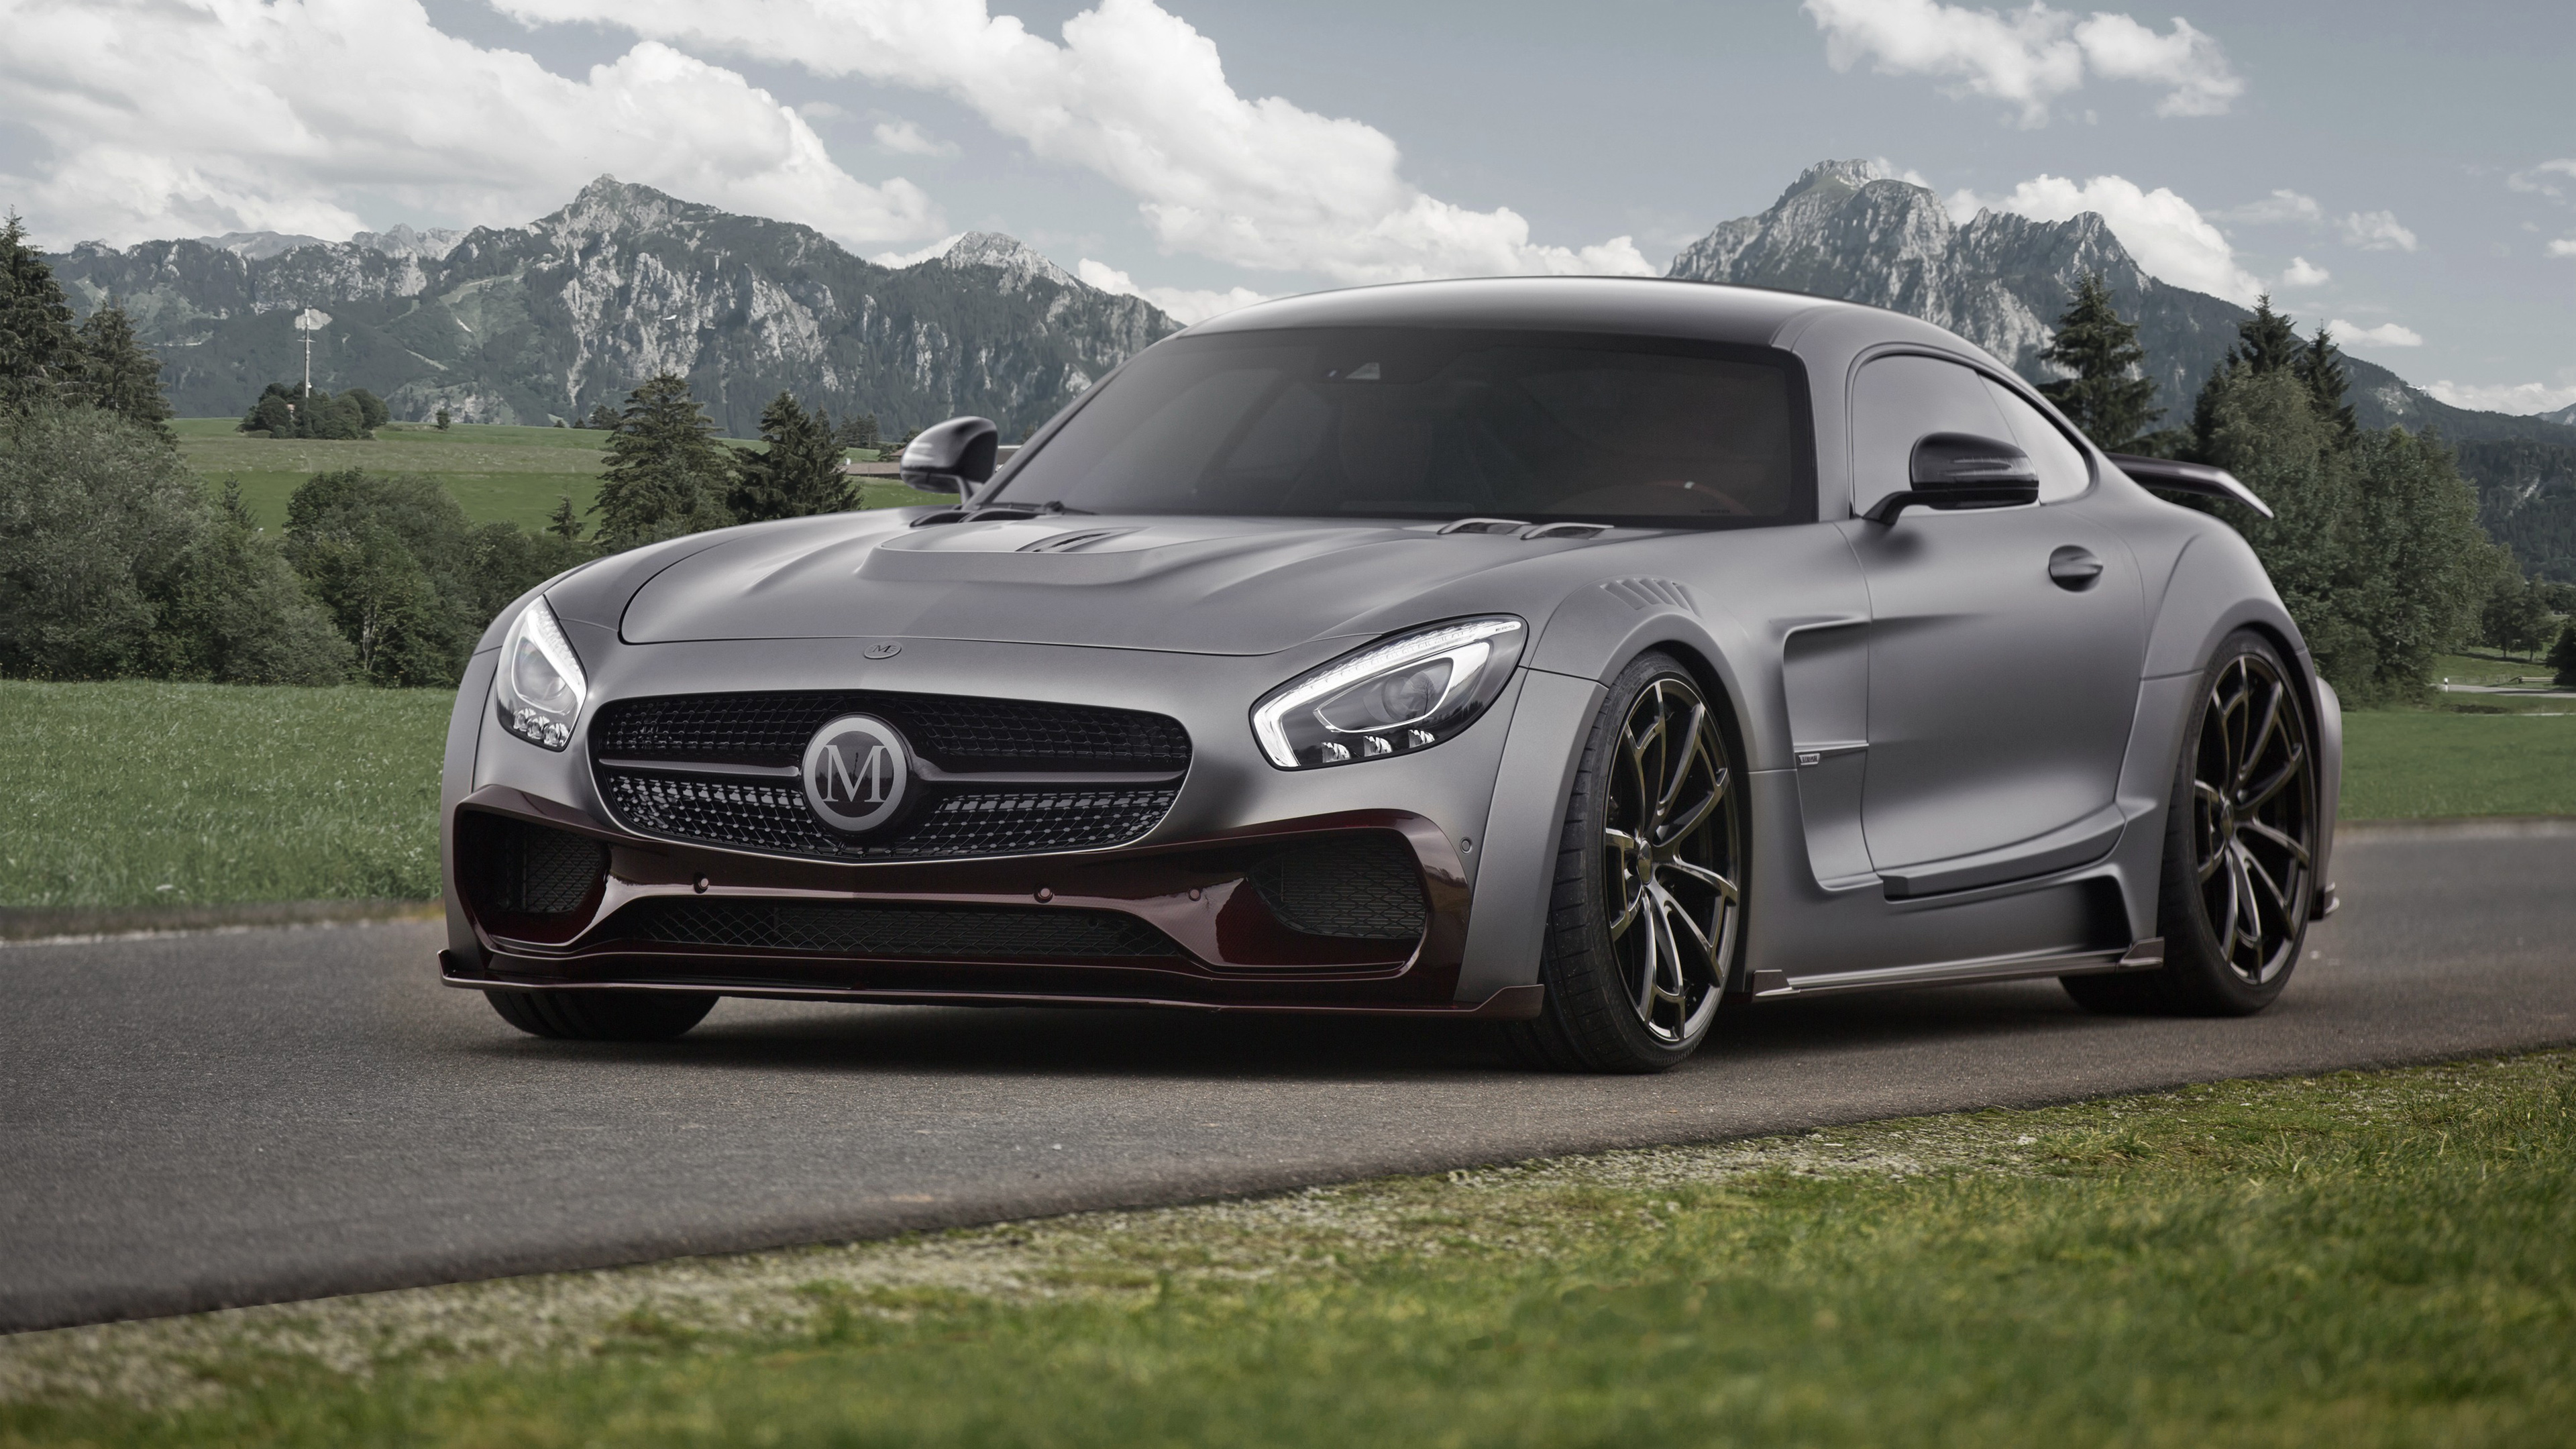 2016 Mansory Mercedes Amg Gt S Wallpaper Hd Car Wallpapers Id 6318